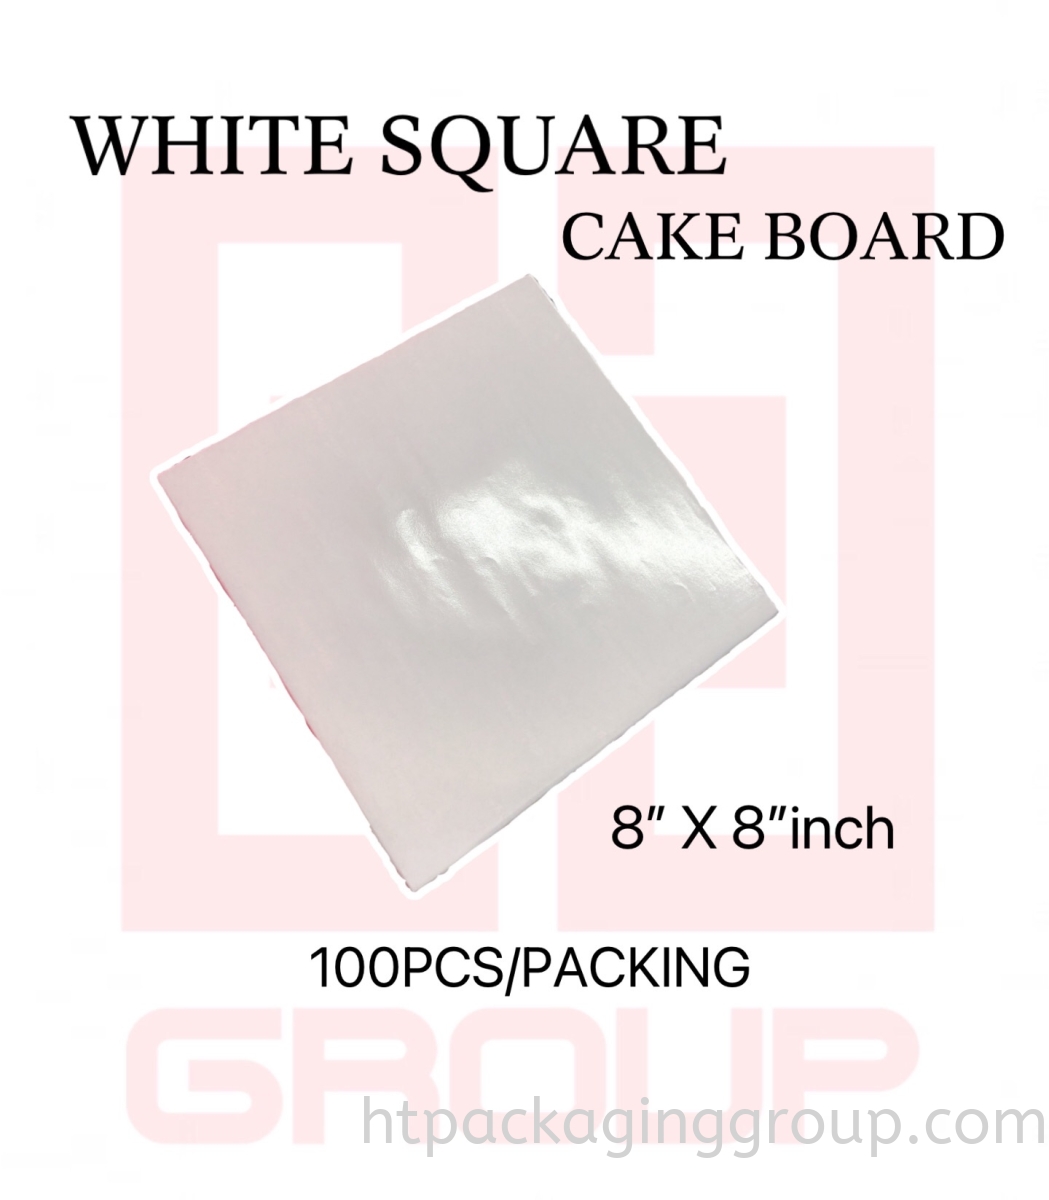 8inch X 8inch £¨100PCS/PACKING£© WHITE SQUARE CAKE BOARD  CAKE BOARD READY MADE Malaysia, Perak Supplier, Manufacturer, Supply, Supplies | HT Packaging Group (M) Sdn Bhd